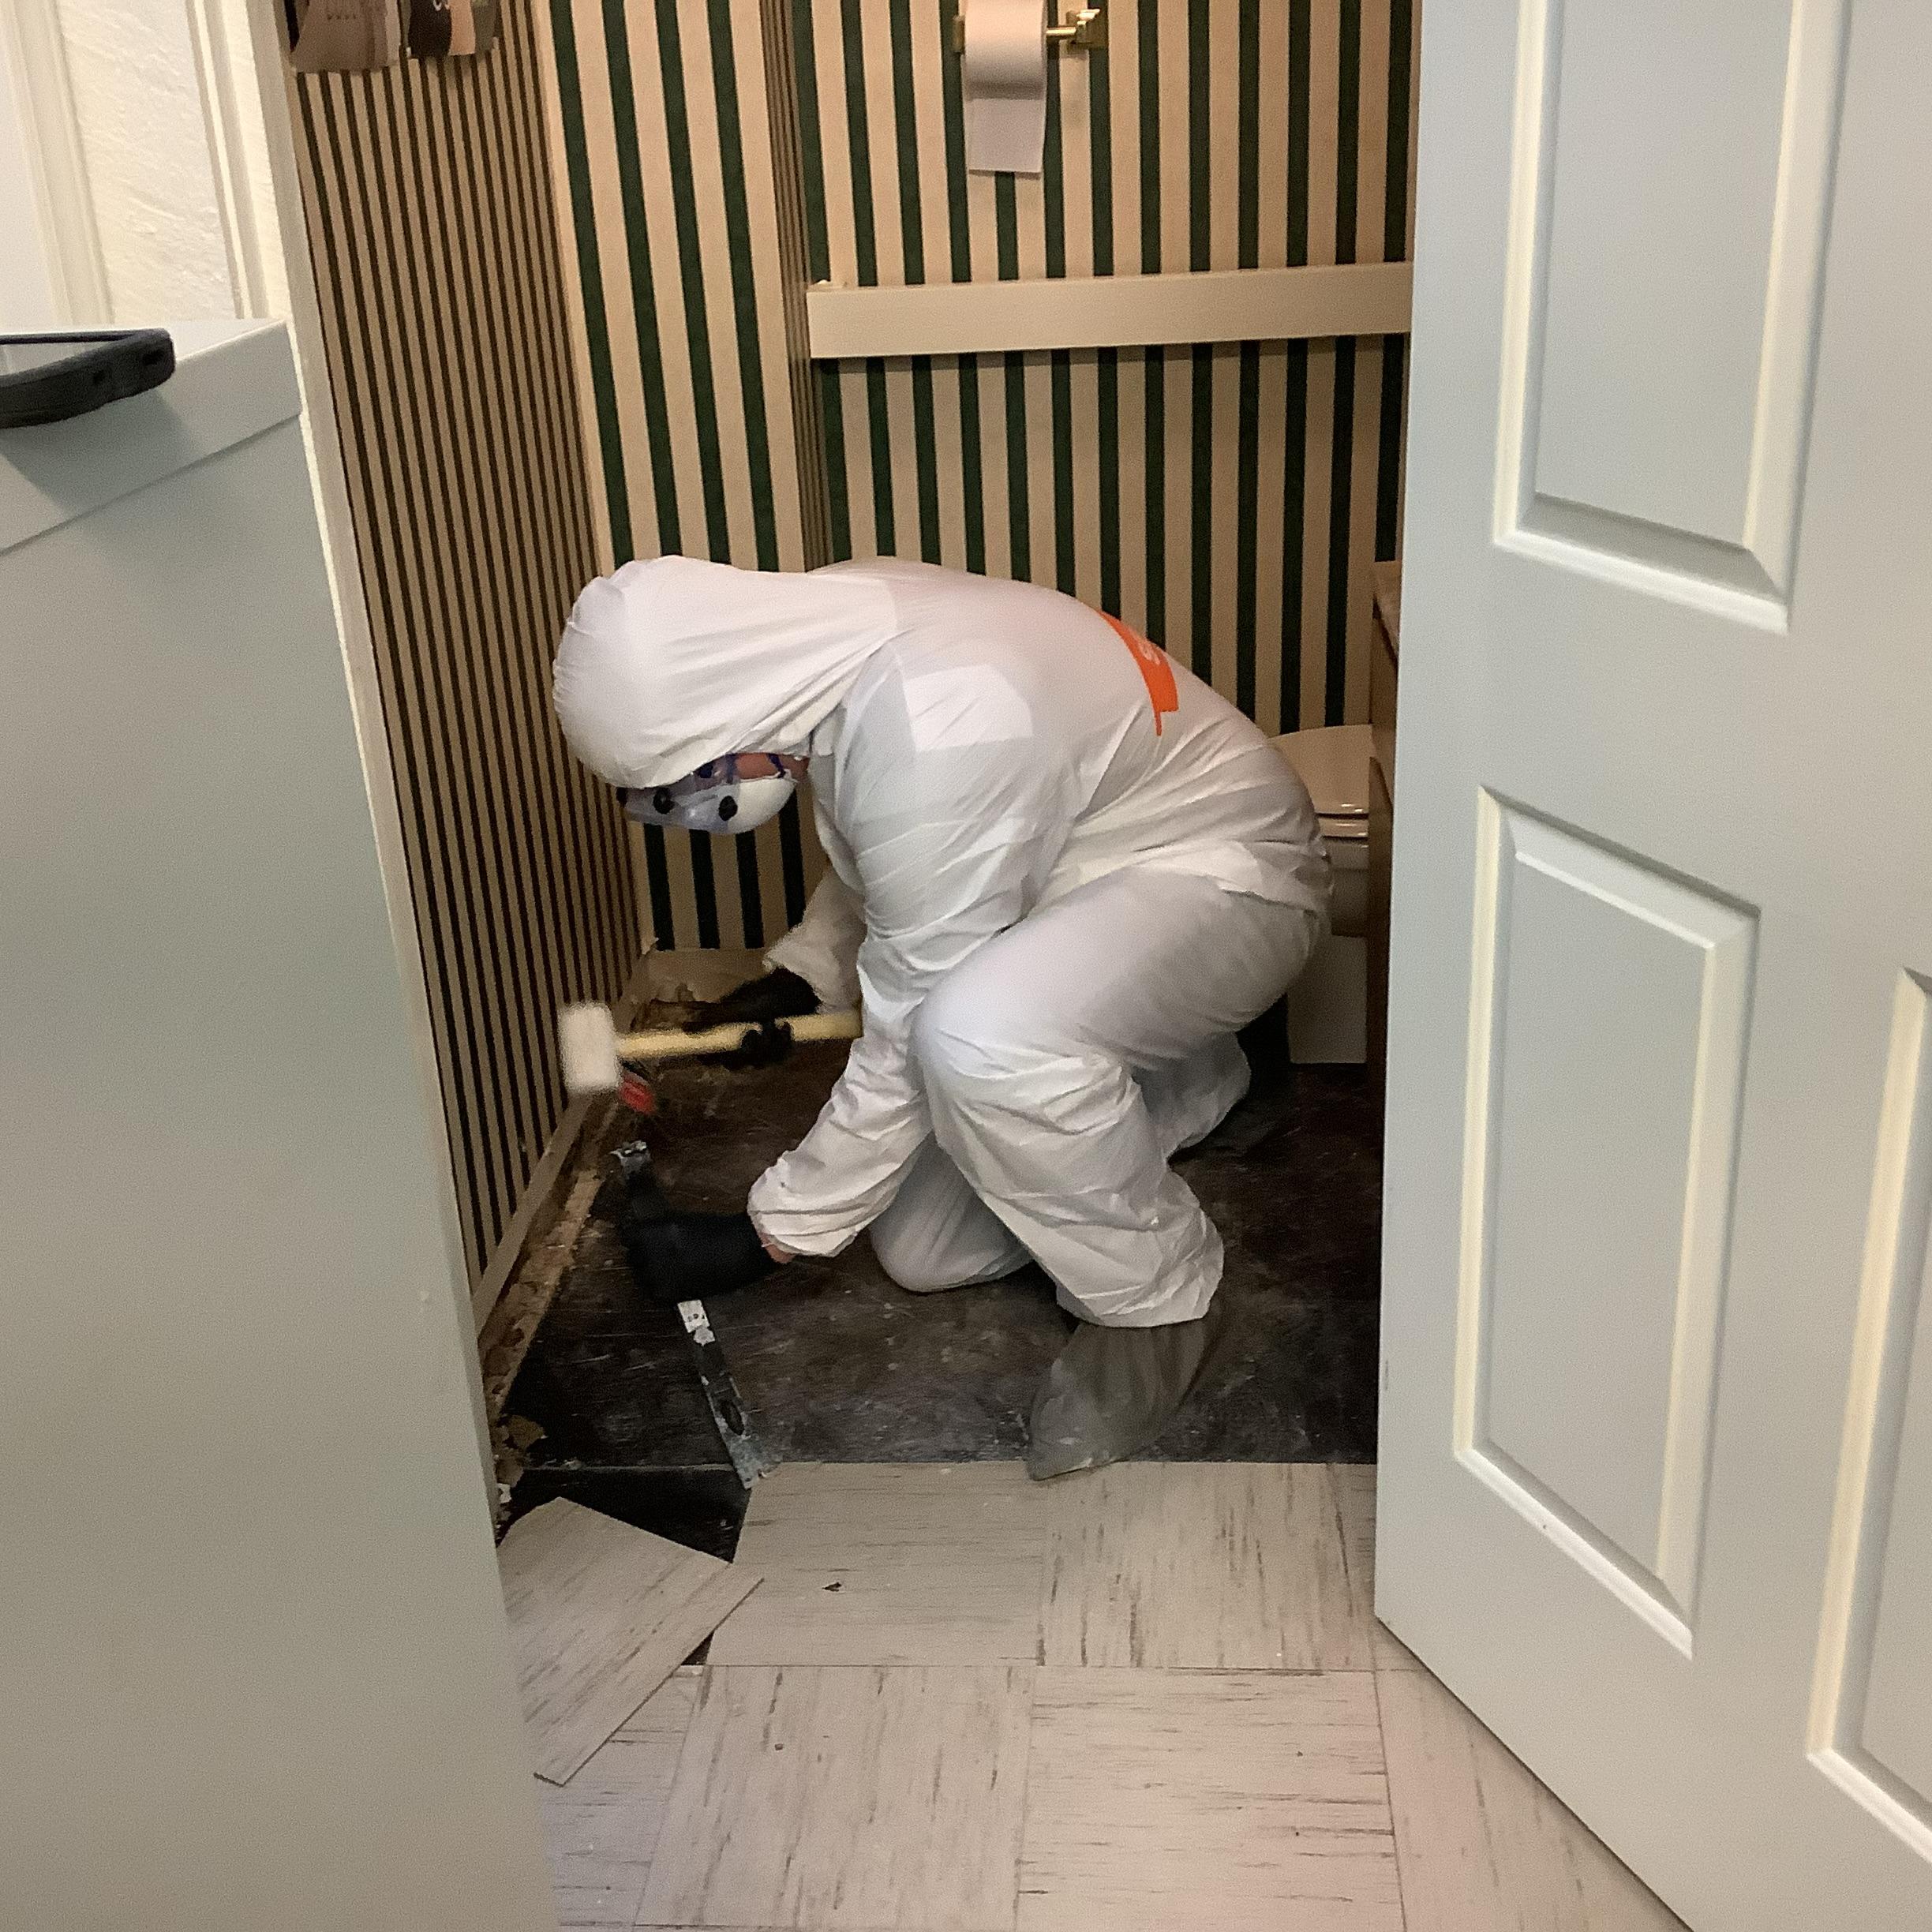 On sewage or mold losses, we protect our team members with PPE.